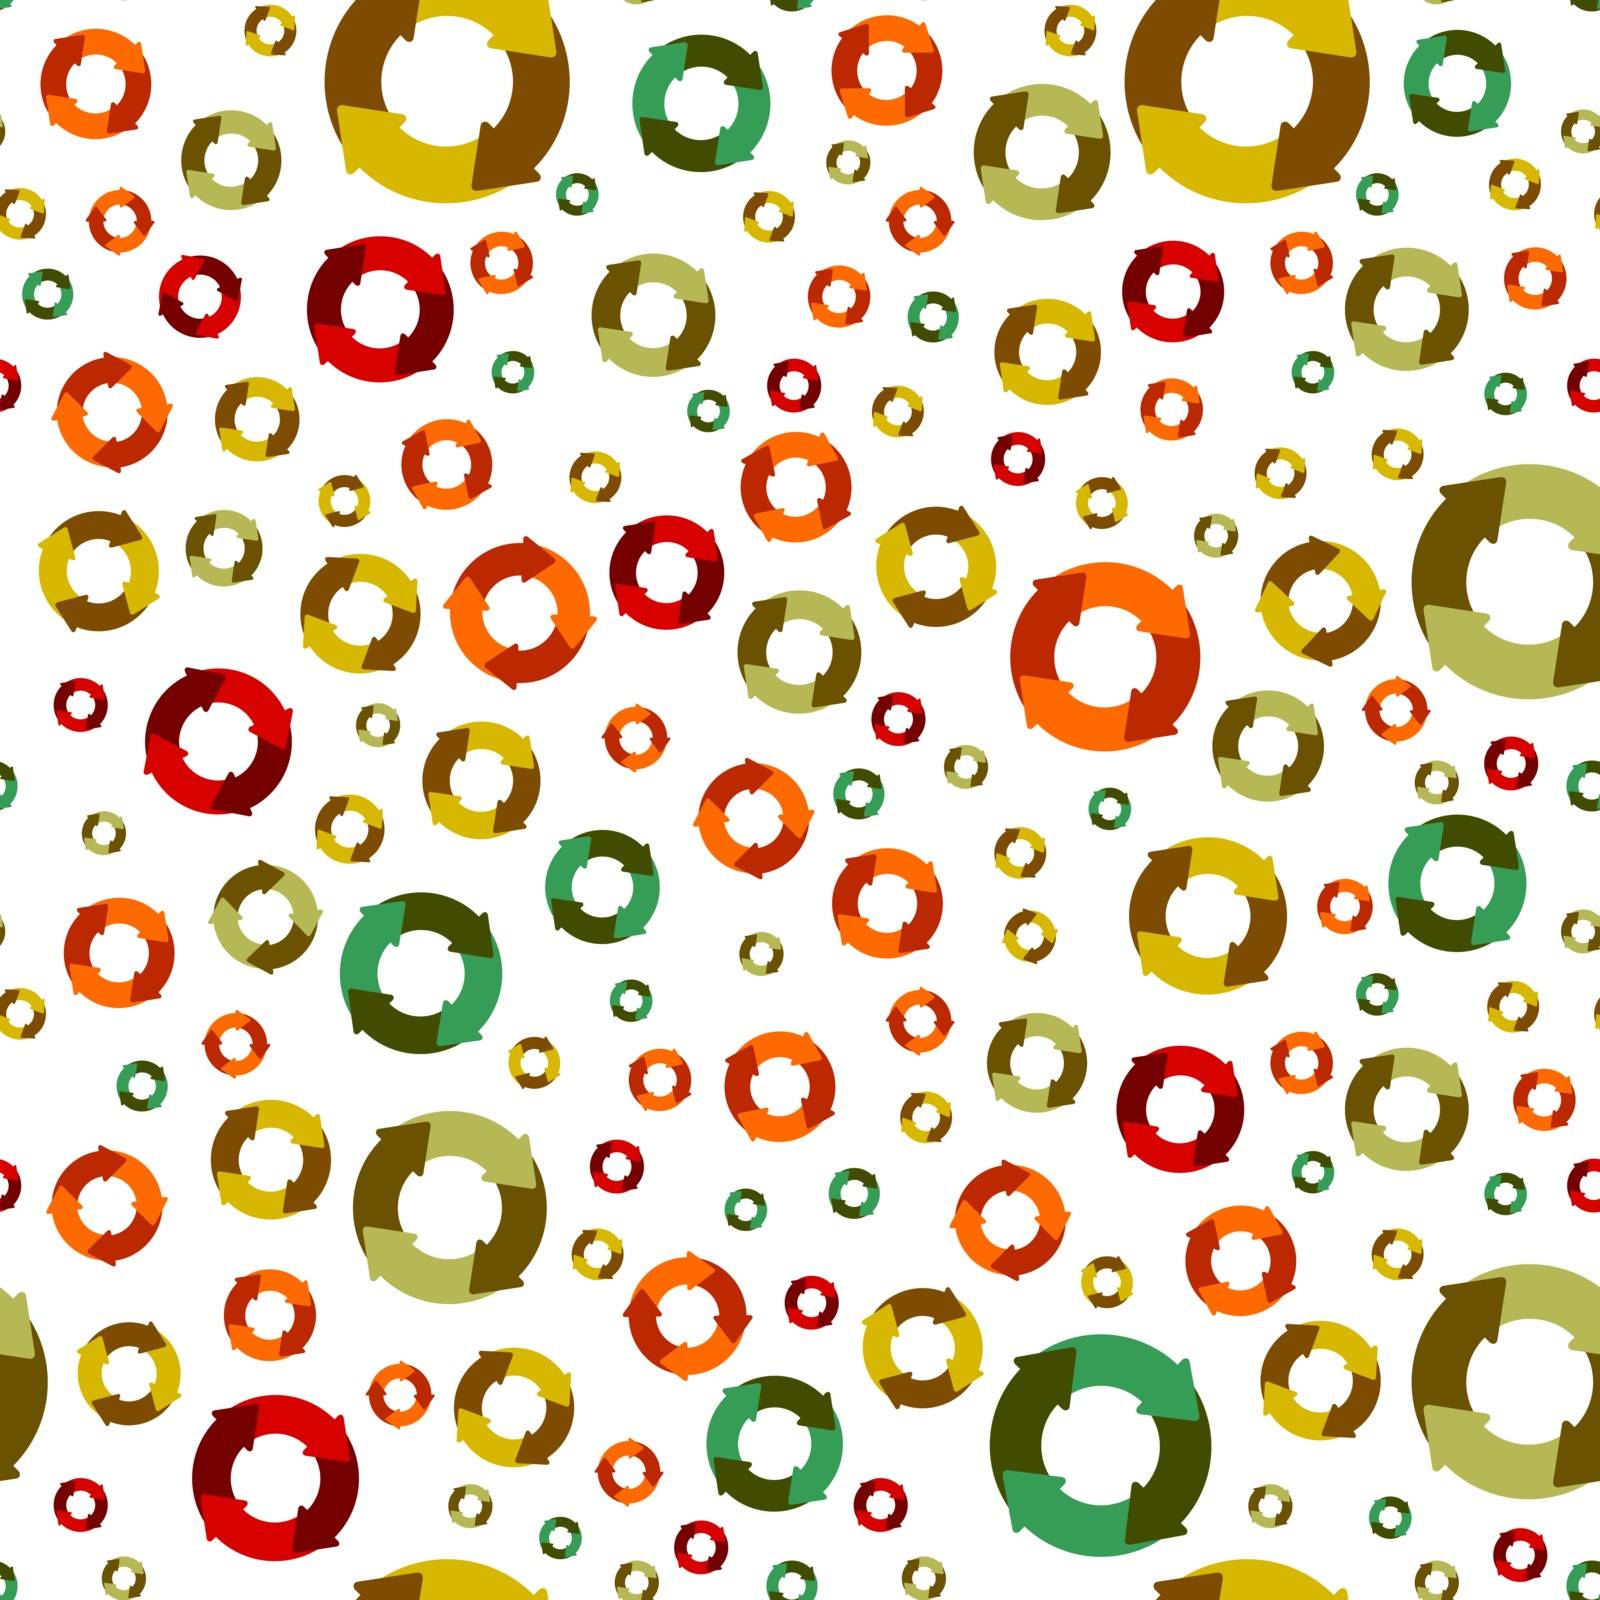 The abstract pattern made out of various colors cycle diagrams